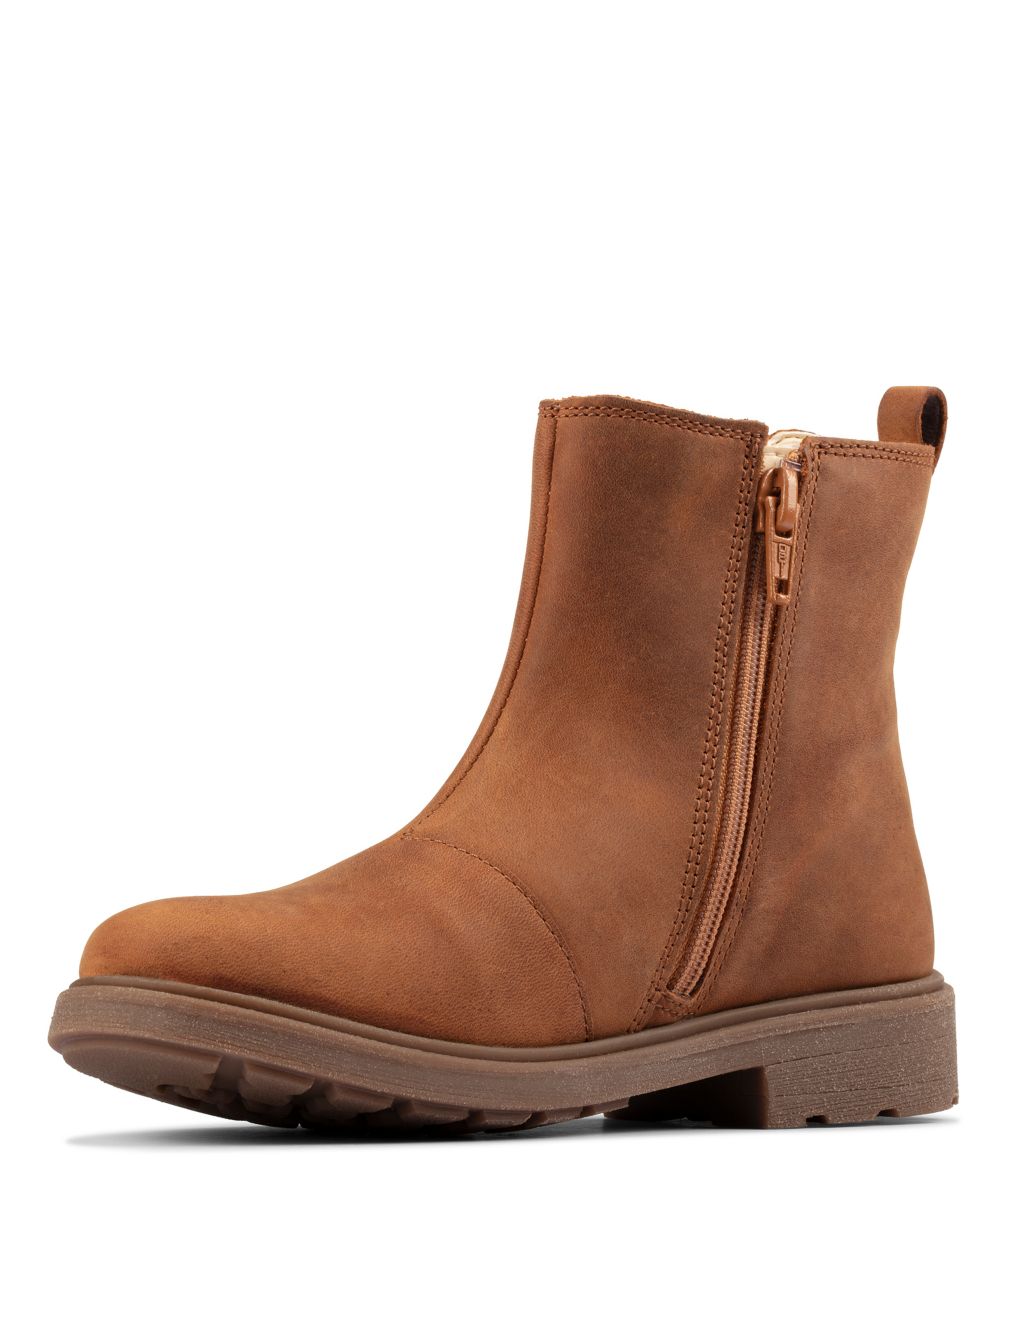 Kids' Leather Chelsea Boots image 2